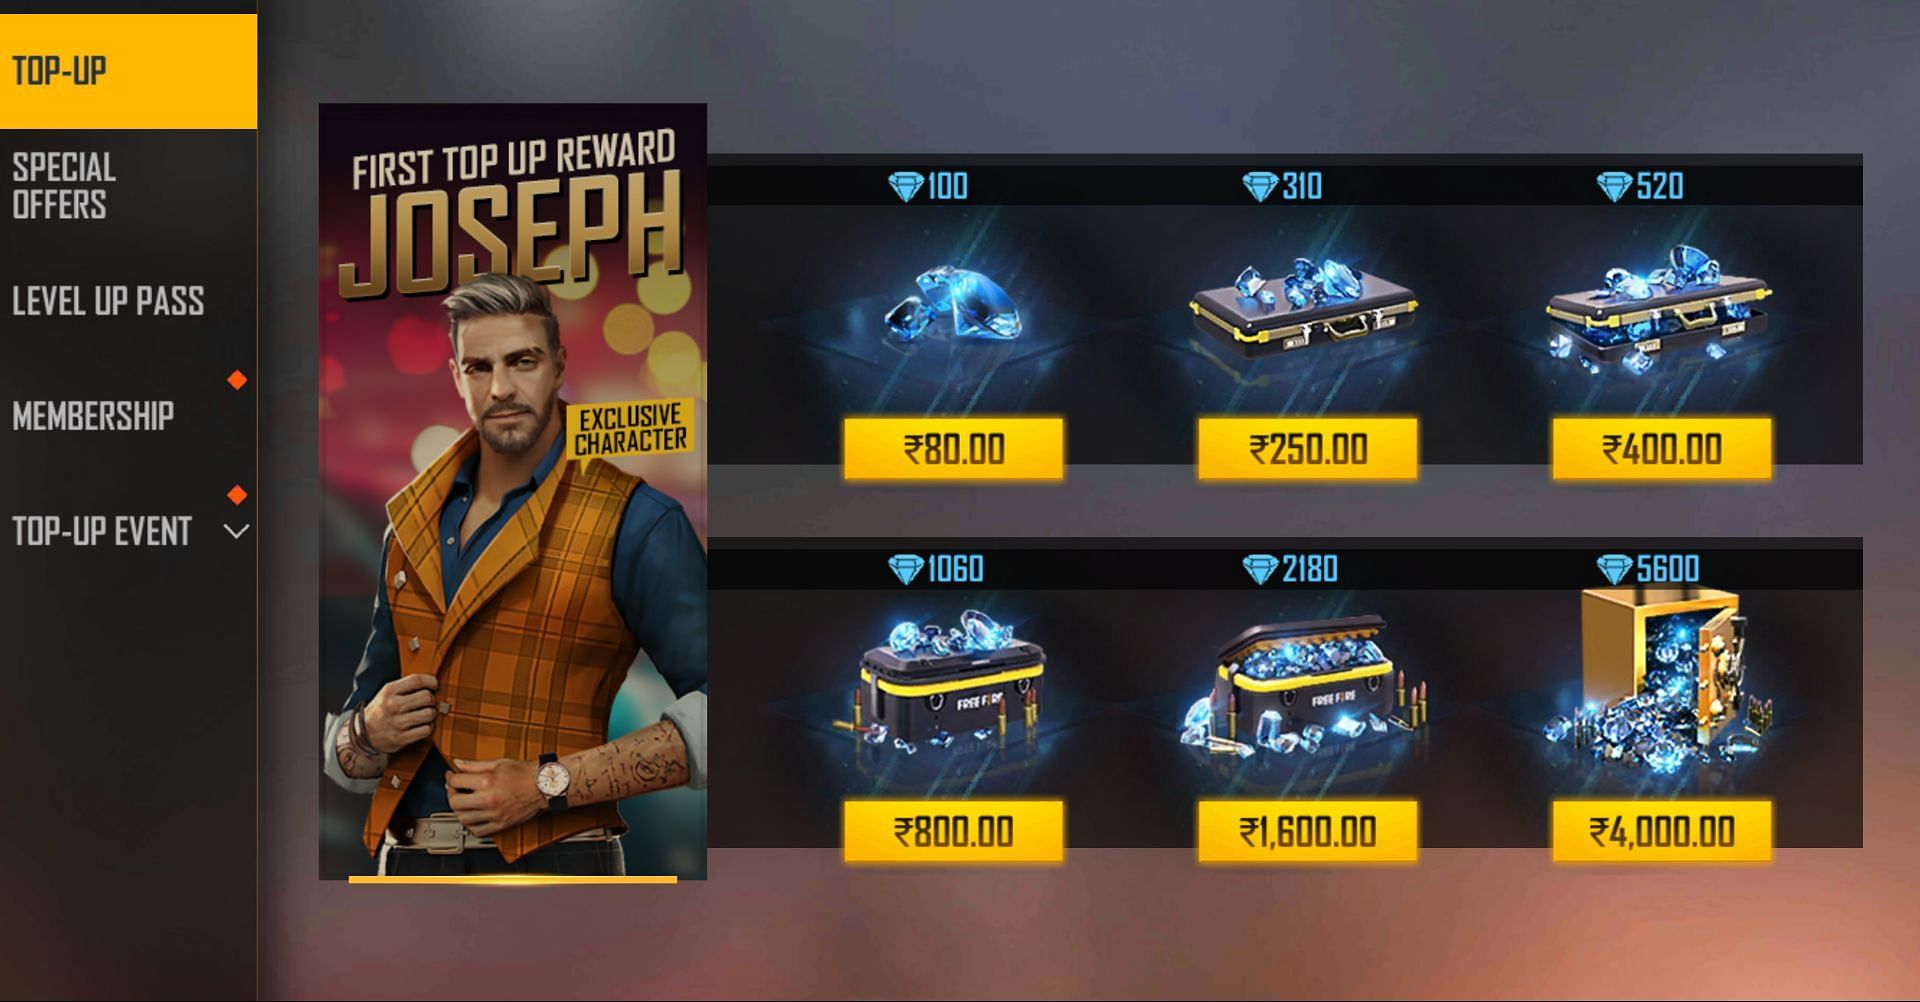 Players can press the button below the desired top-up pack (Image via Free Fire)